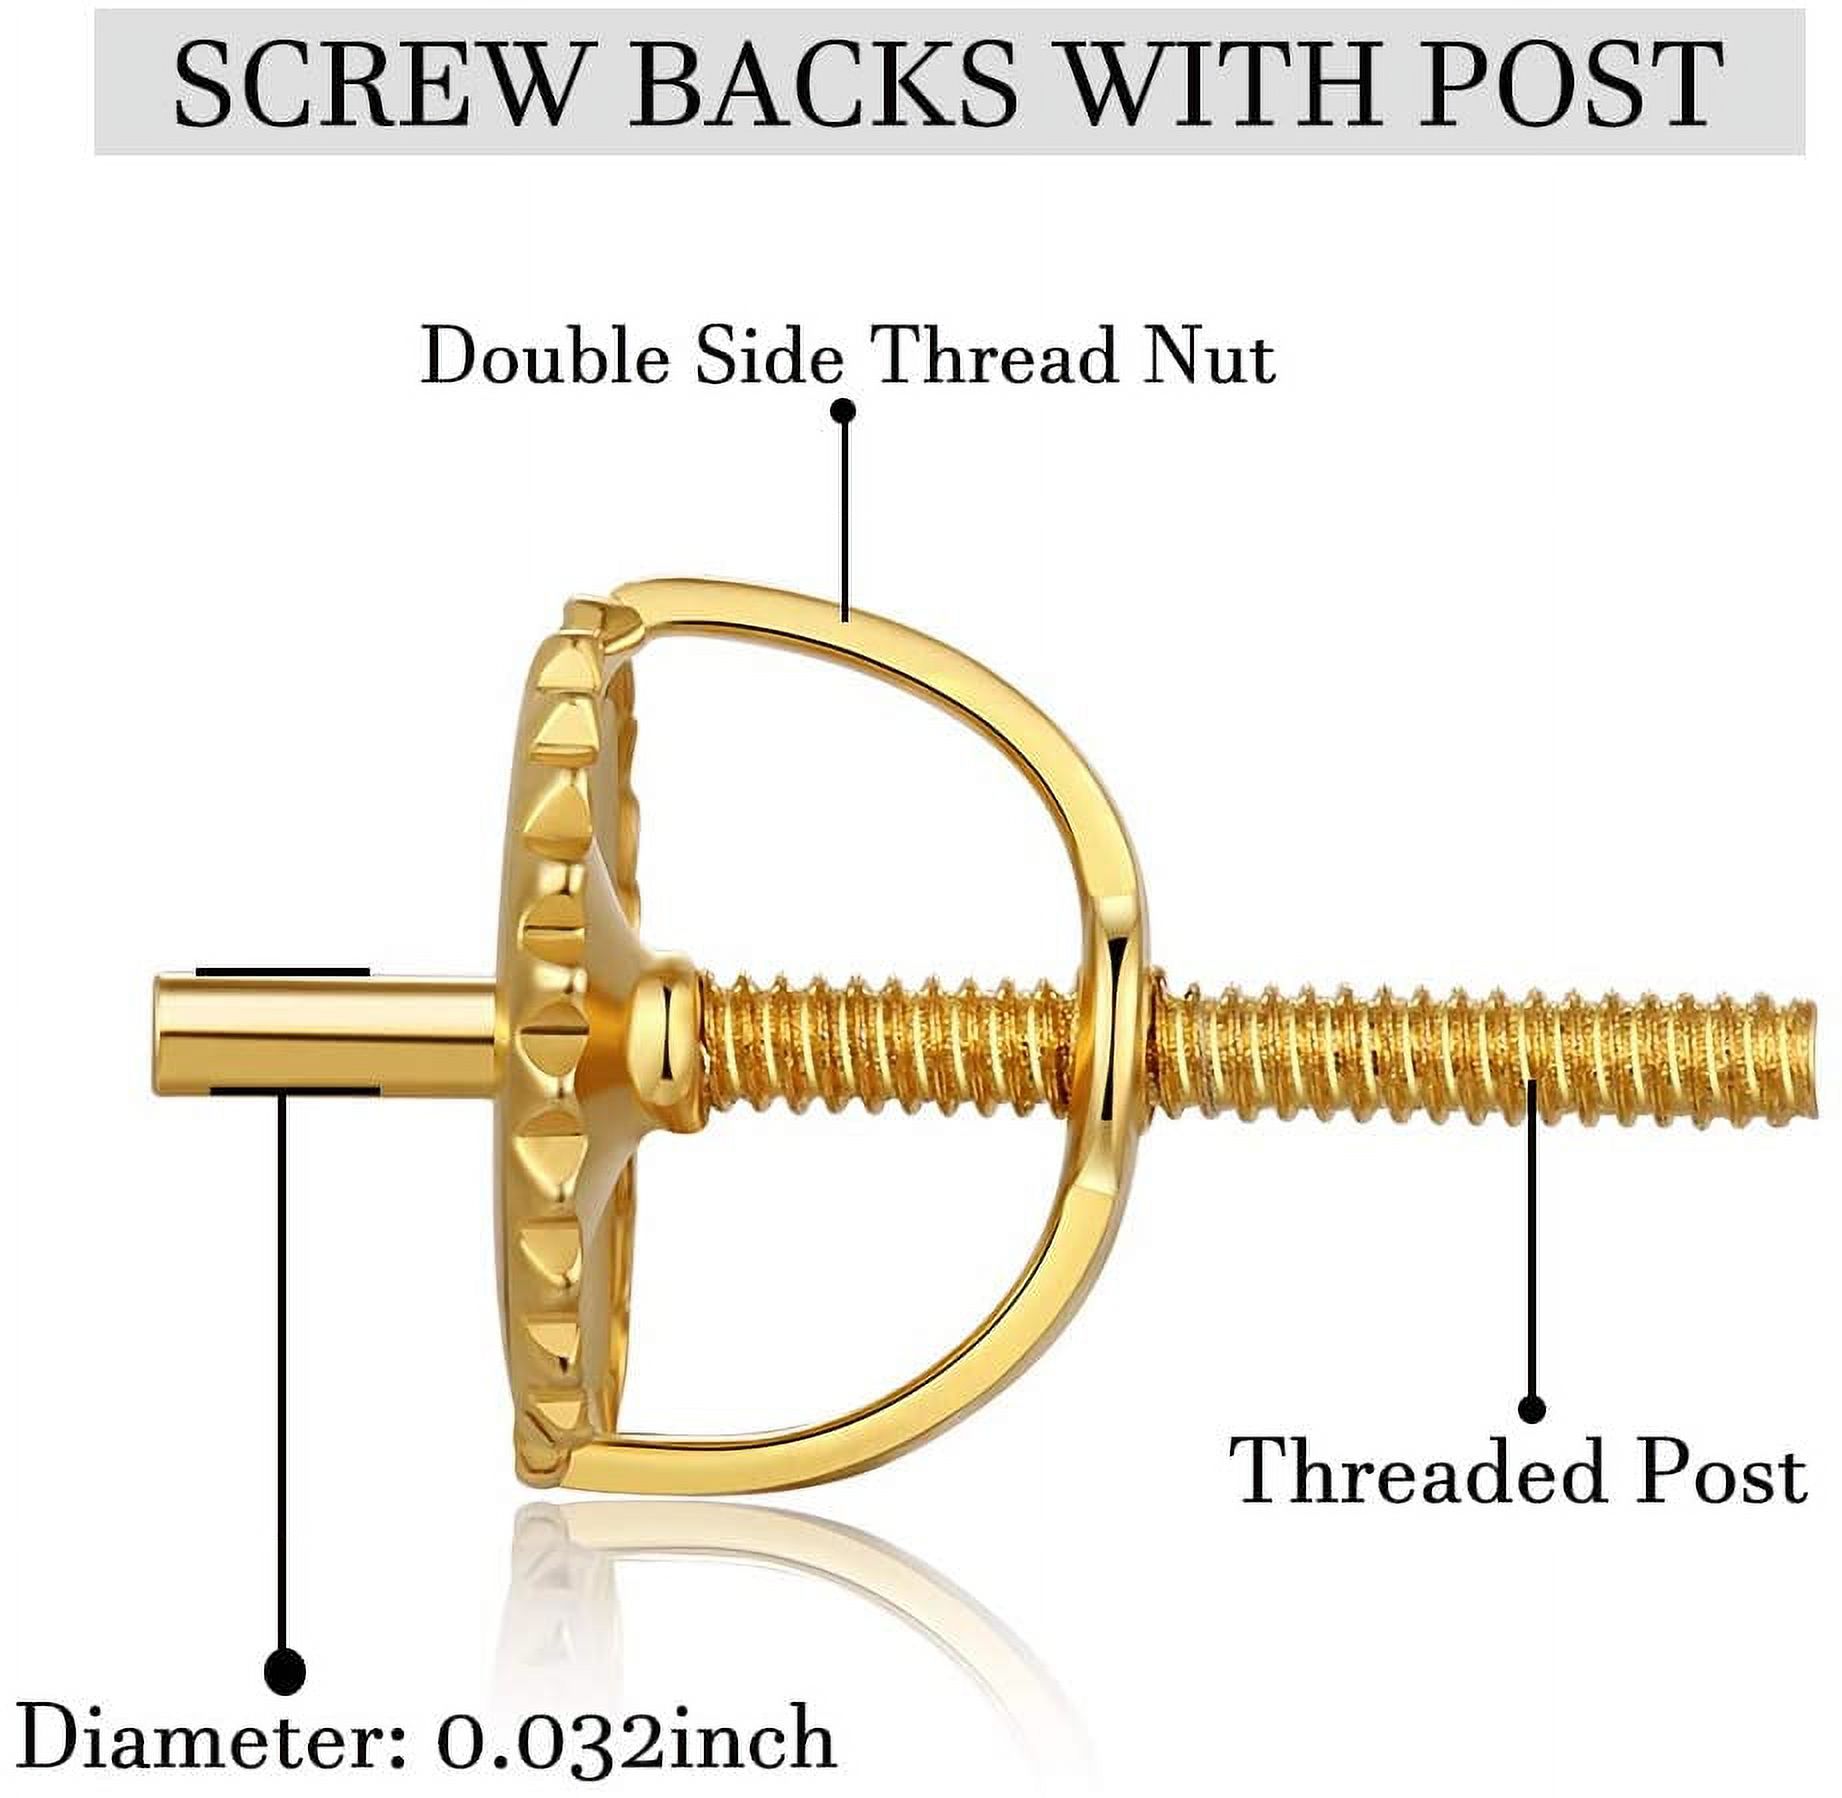 3 Pairs Screw Earring Backs for Studs, 14K Gold Plated 925 Silver Secure Locking Hypoallergenic Screw Earring Backs Replacement,Screw Backs Fit forThreaded Post 0.032"(6mm) - image 5 of 5